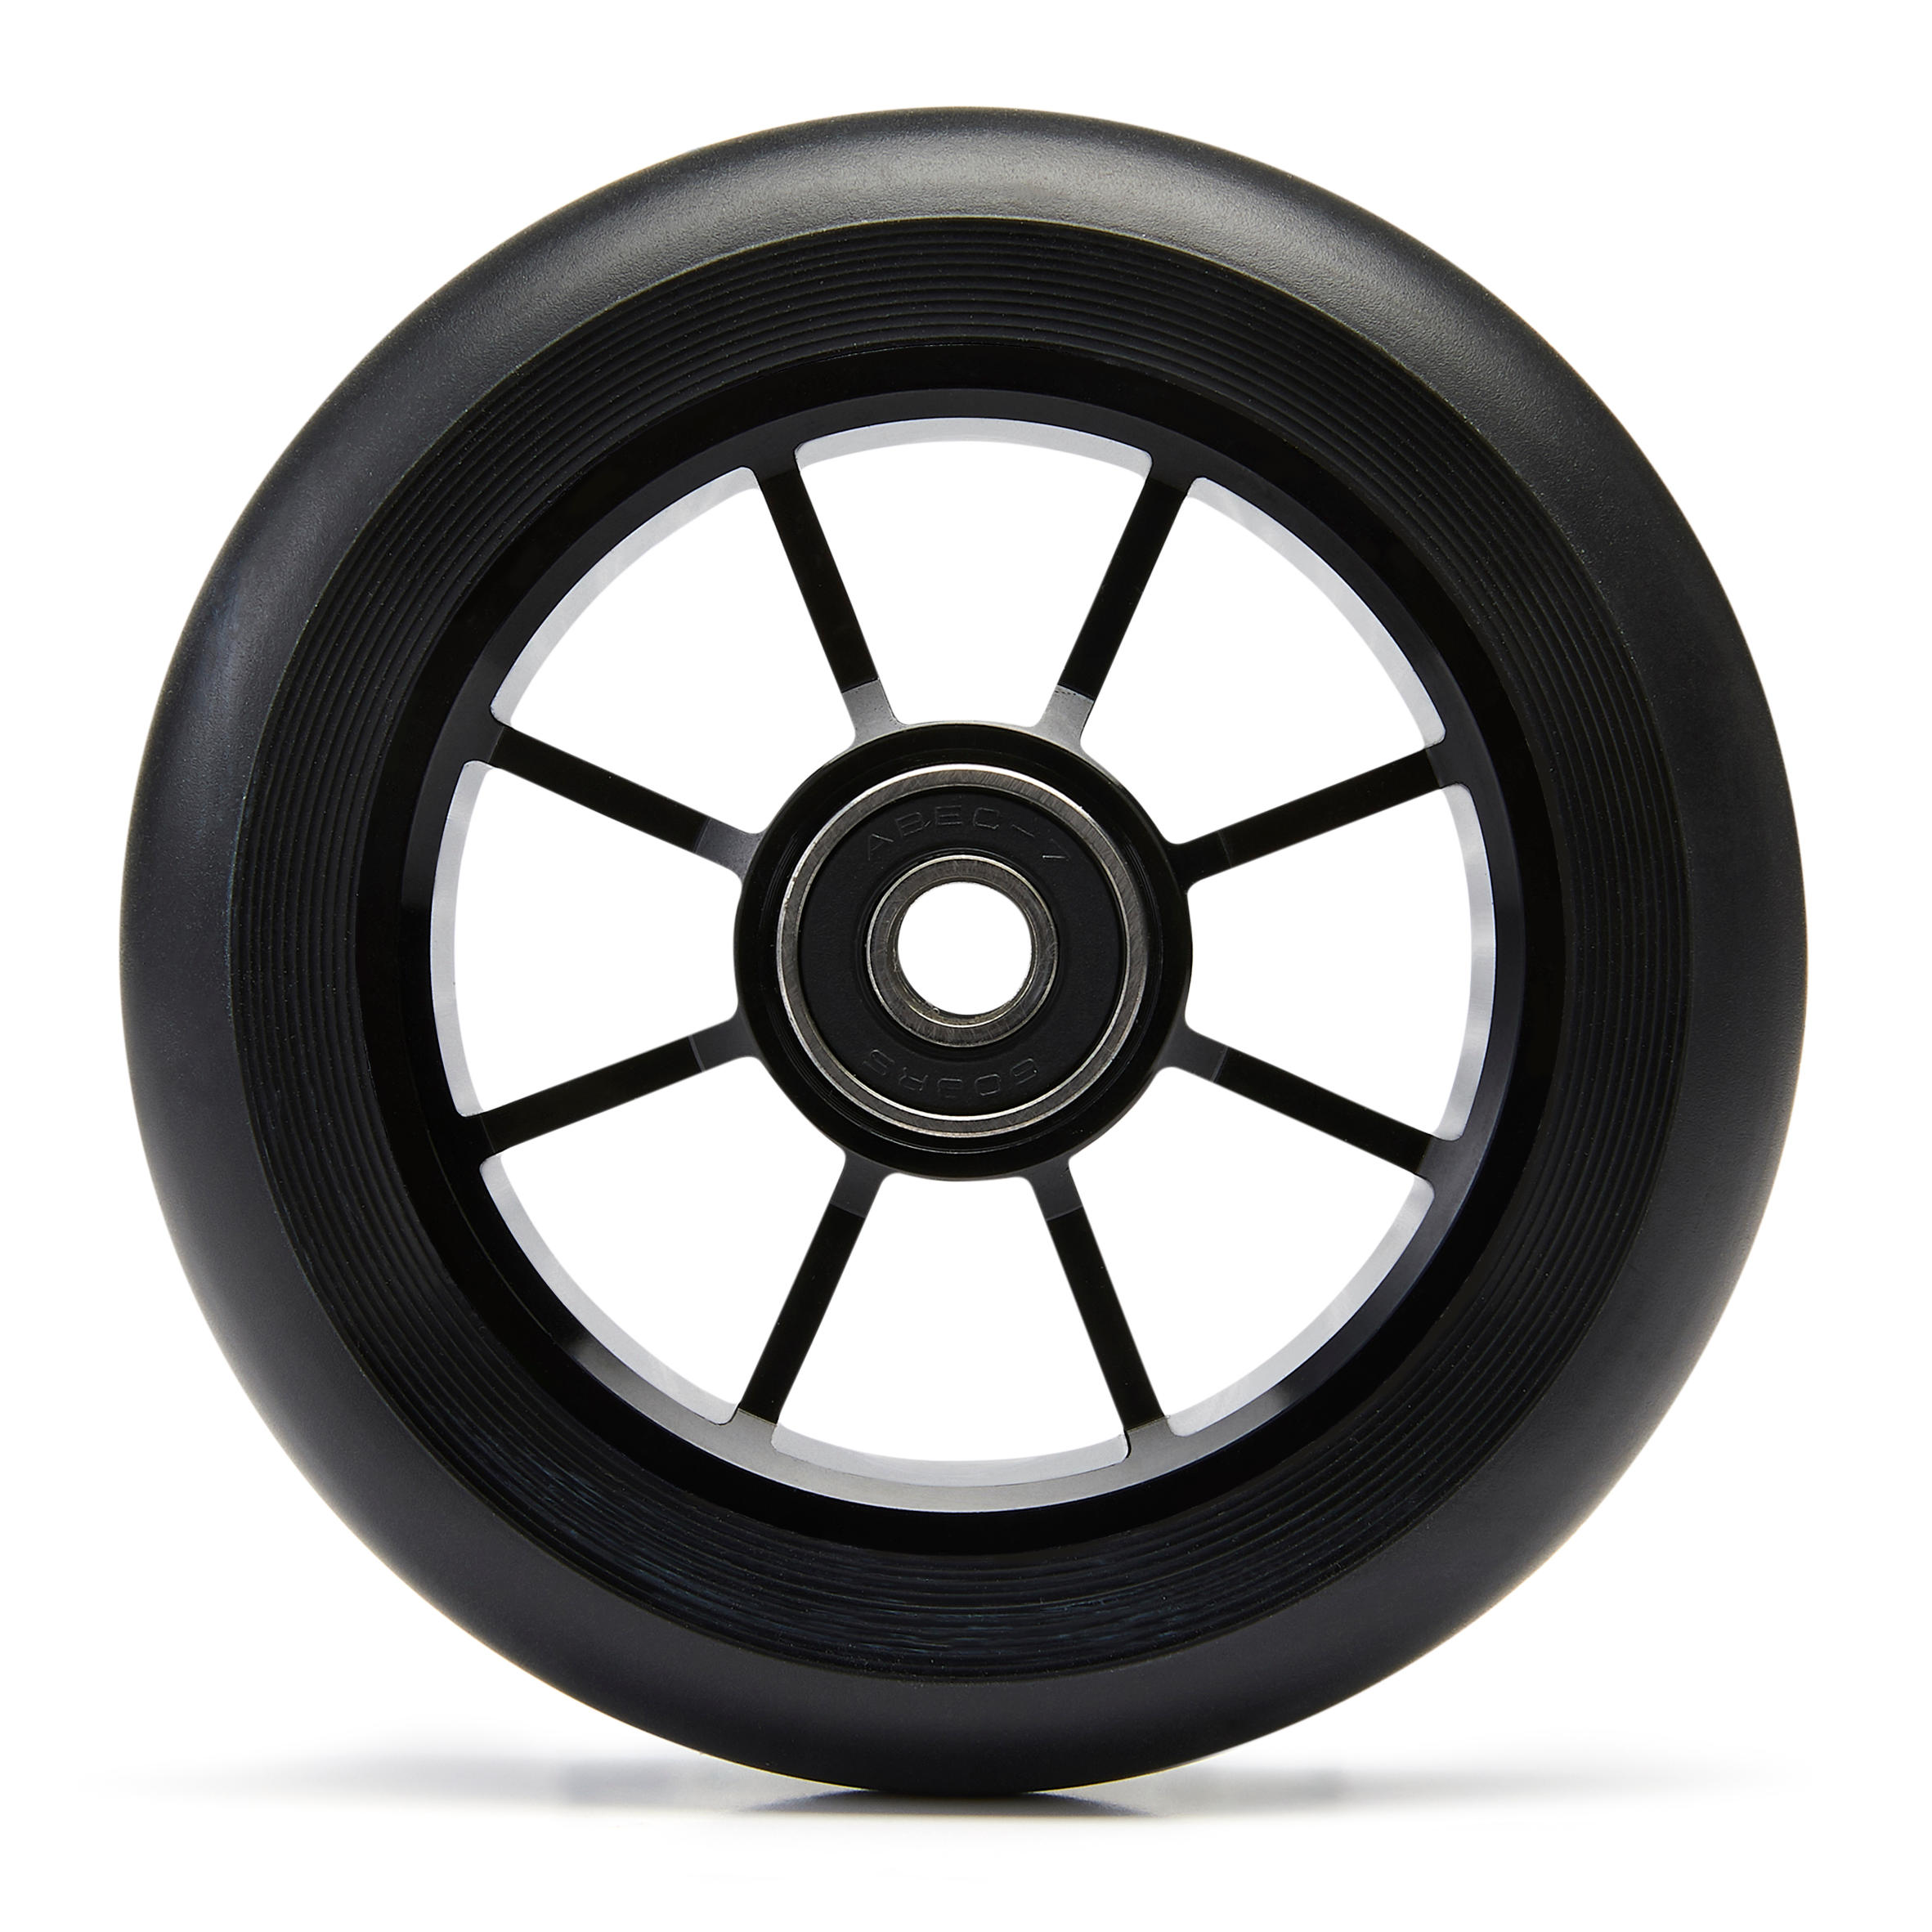 Roue freestyle 100 mm - PU85A - OXELO